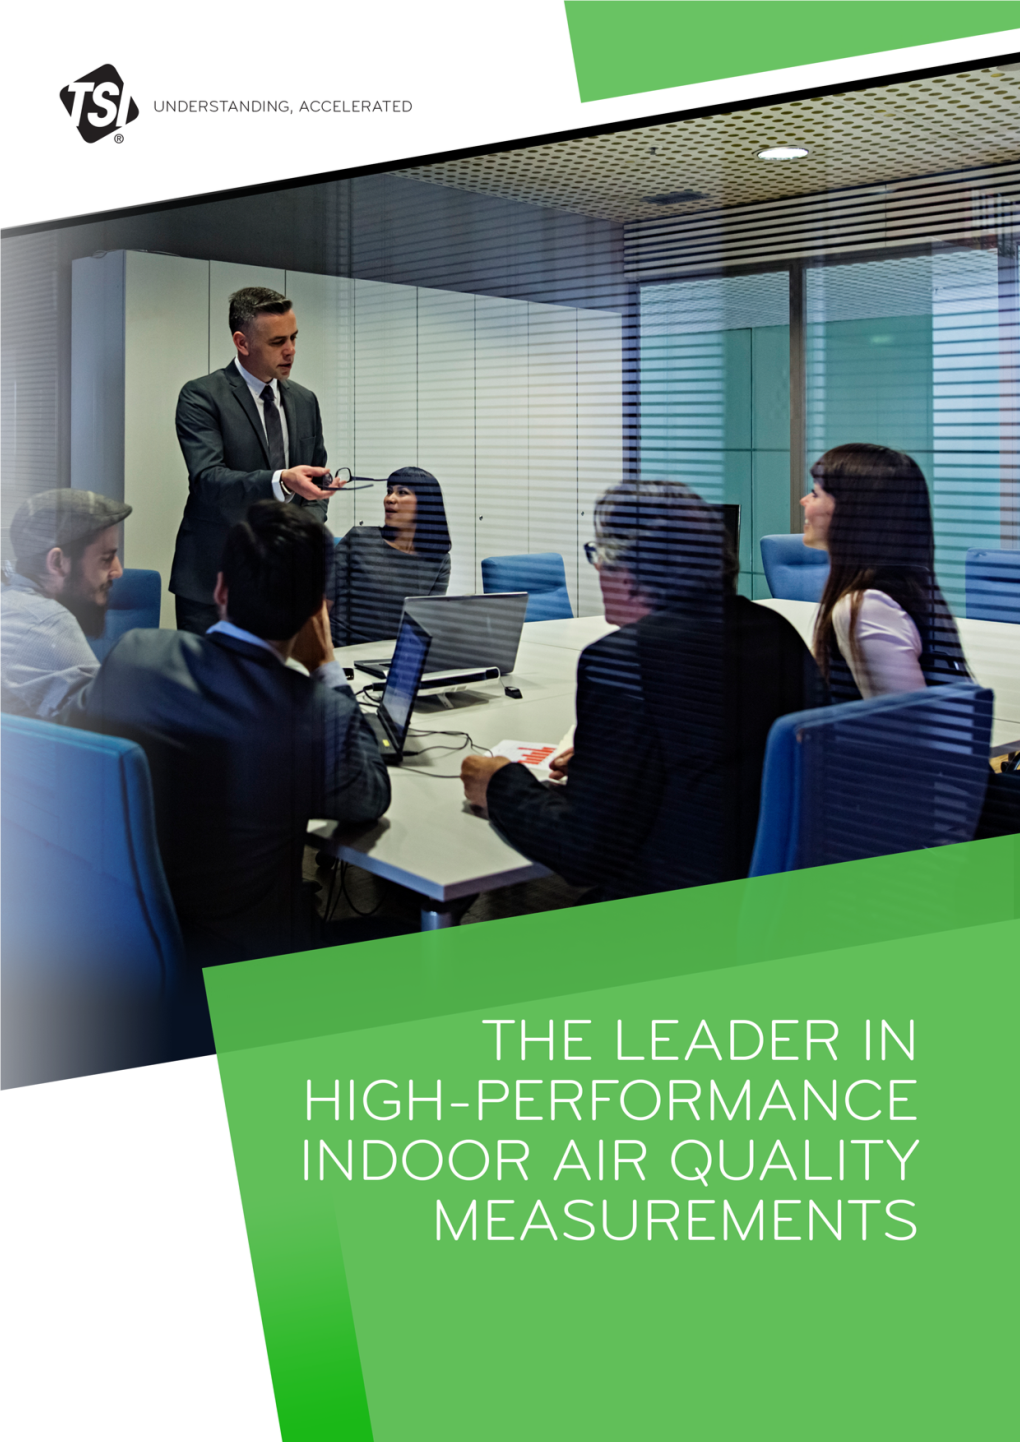 Indoor Air Quality Measurements Family Brochure A4